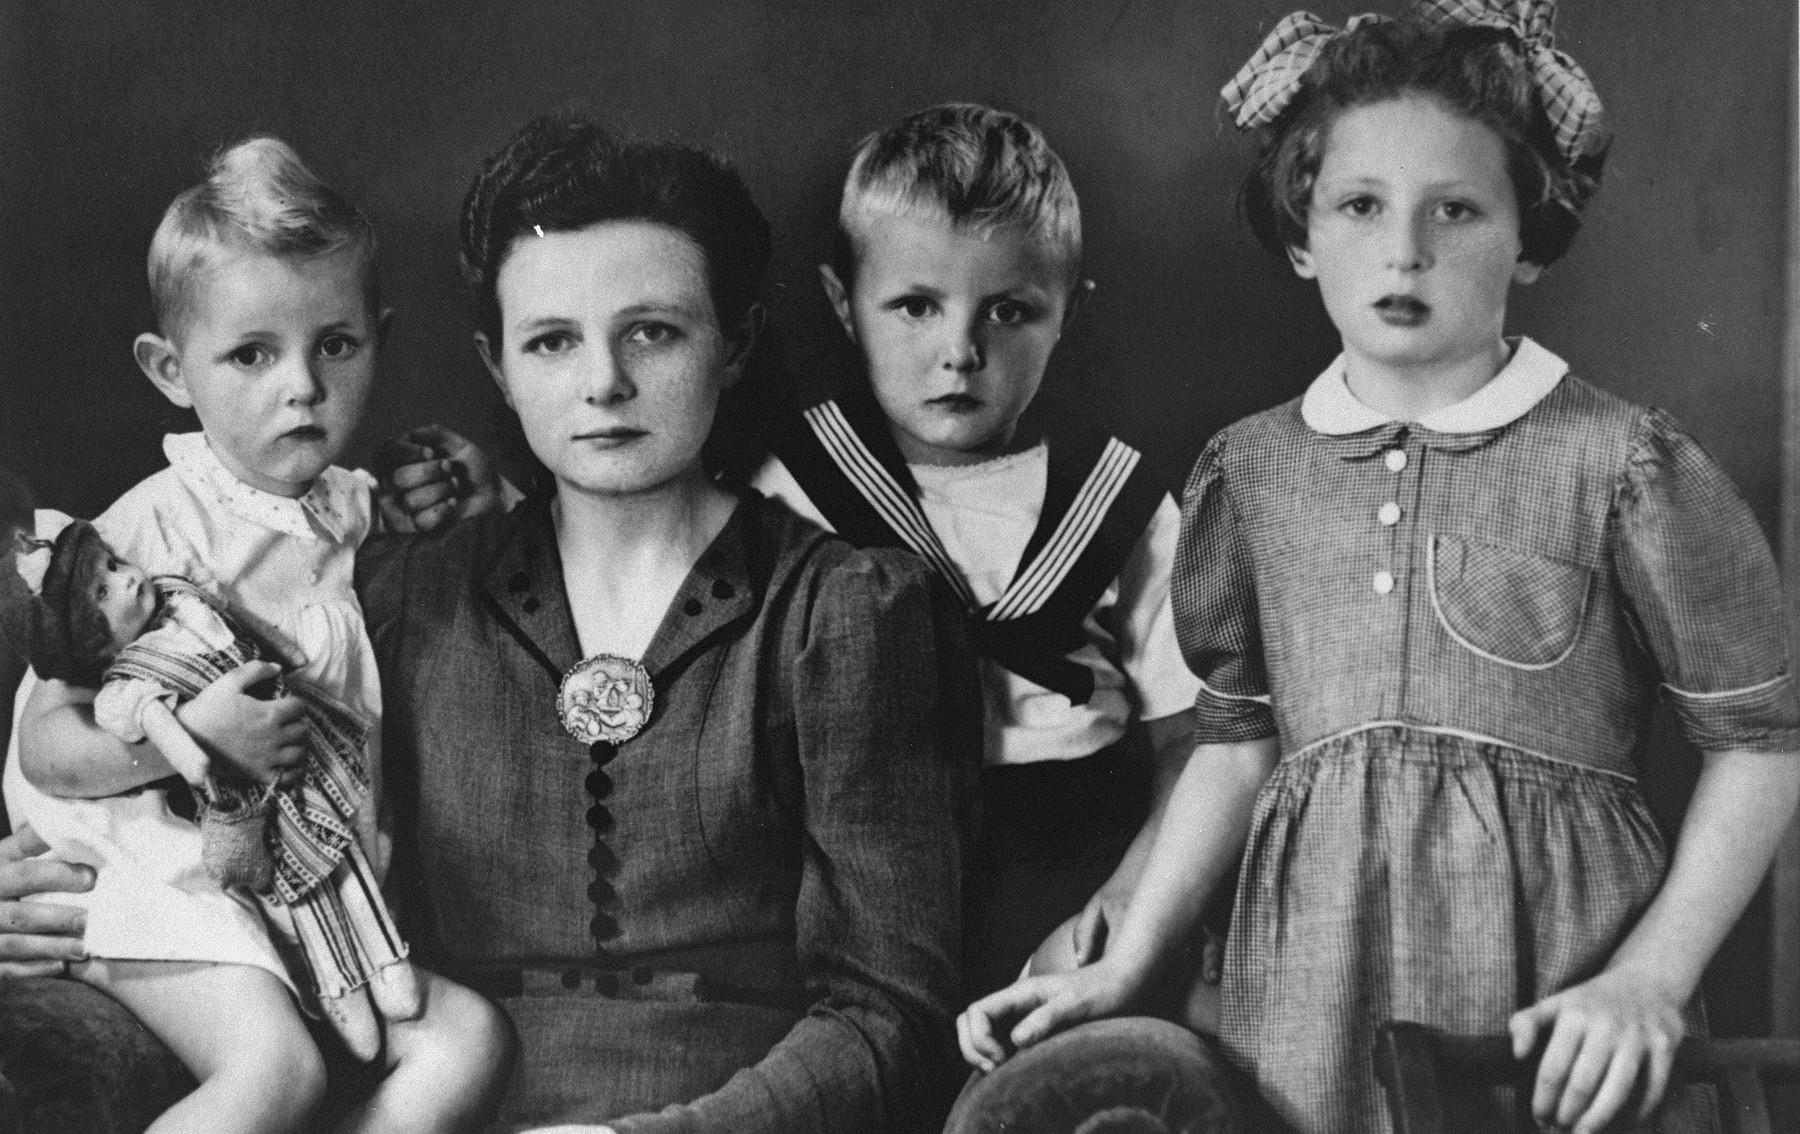 A Jewish child in hiding poses with members of the Dutch family that adopted her.  Pictured is the donor, Henny Kalkstein (right) with Dieuwke Hofstede and her two sons, Maaike and Andries. 

Philip and Dieuwke Hofstede were each honored by Yad Vashem as one of the Righteous Among the Nations.